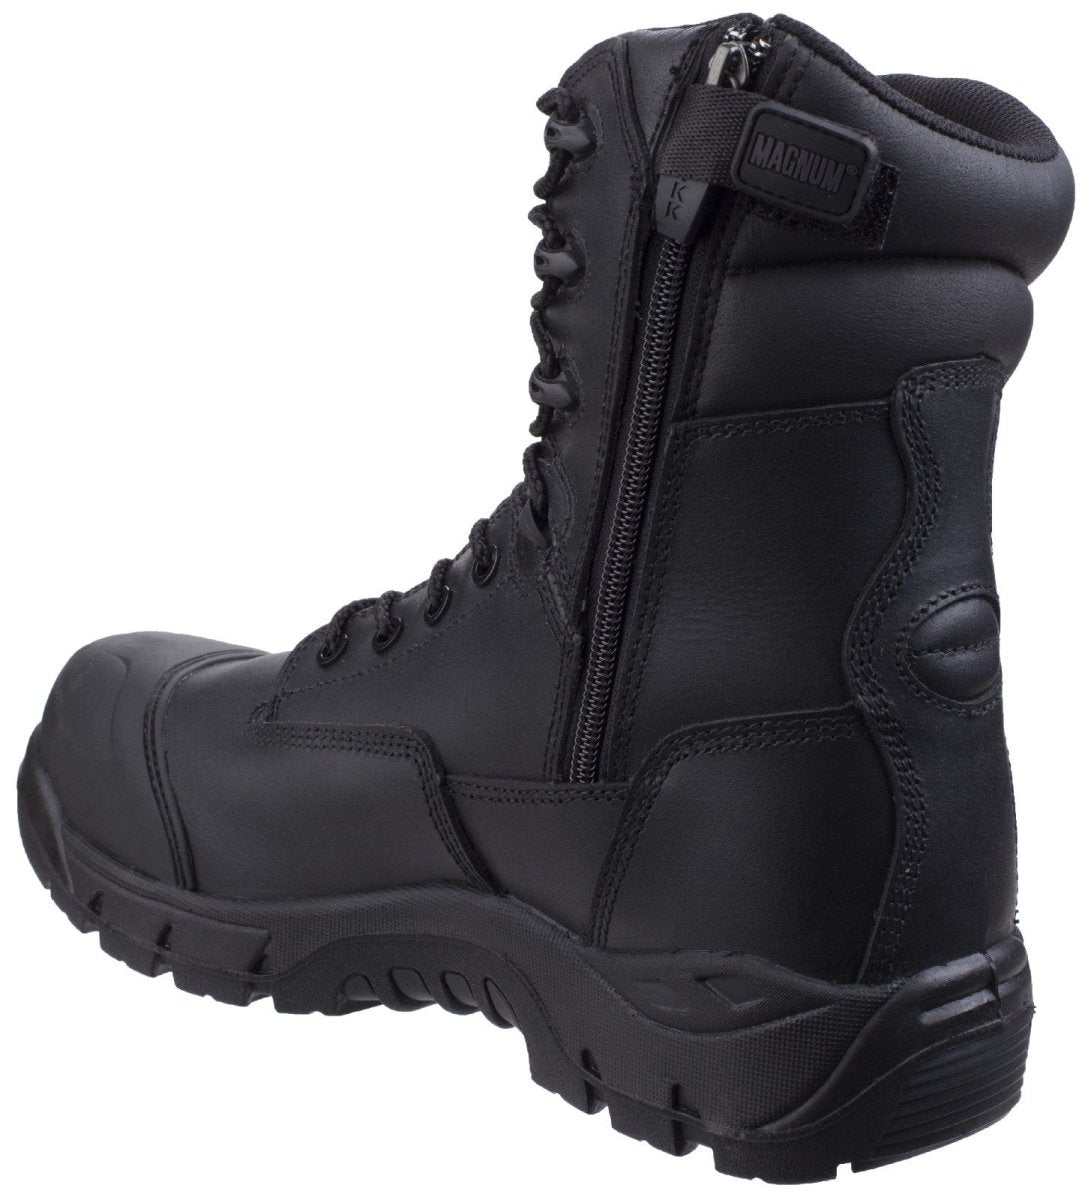 Magnum Rigmaster Waterproof Side Zip Hi-Leg Mens Safety Boots - Shoe Store Direct